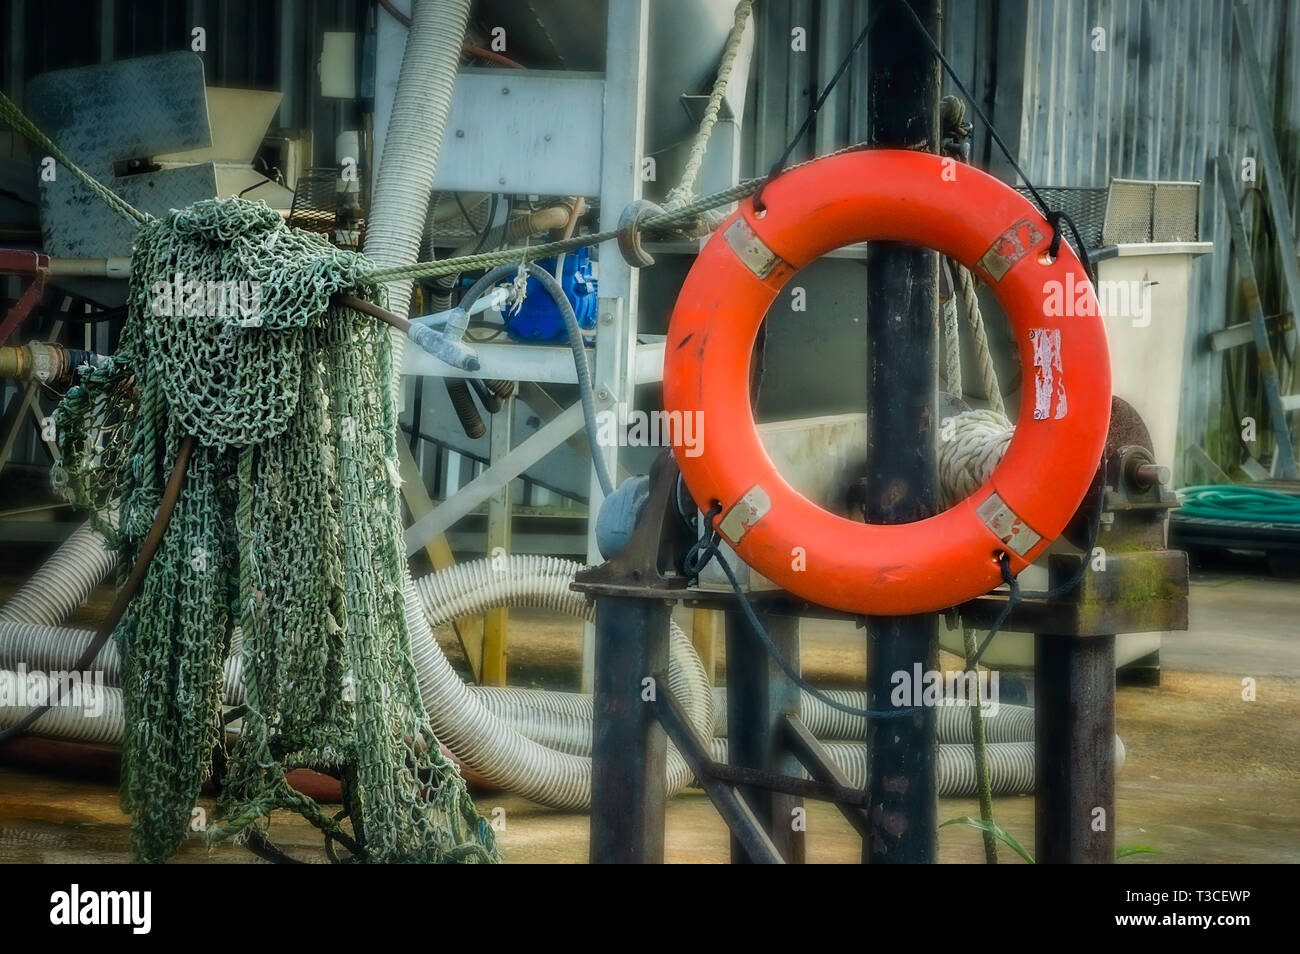 A life preserver and shrimp net are pictured at Dominick’s Seafood, March 4, 2017, in Bayou La Batre, Alabama. Stock Photo